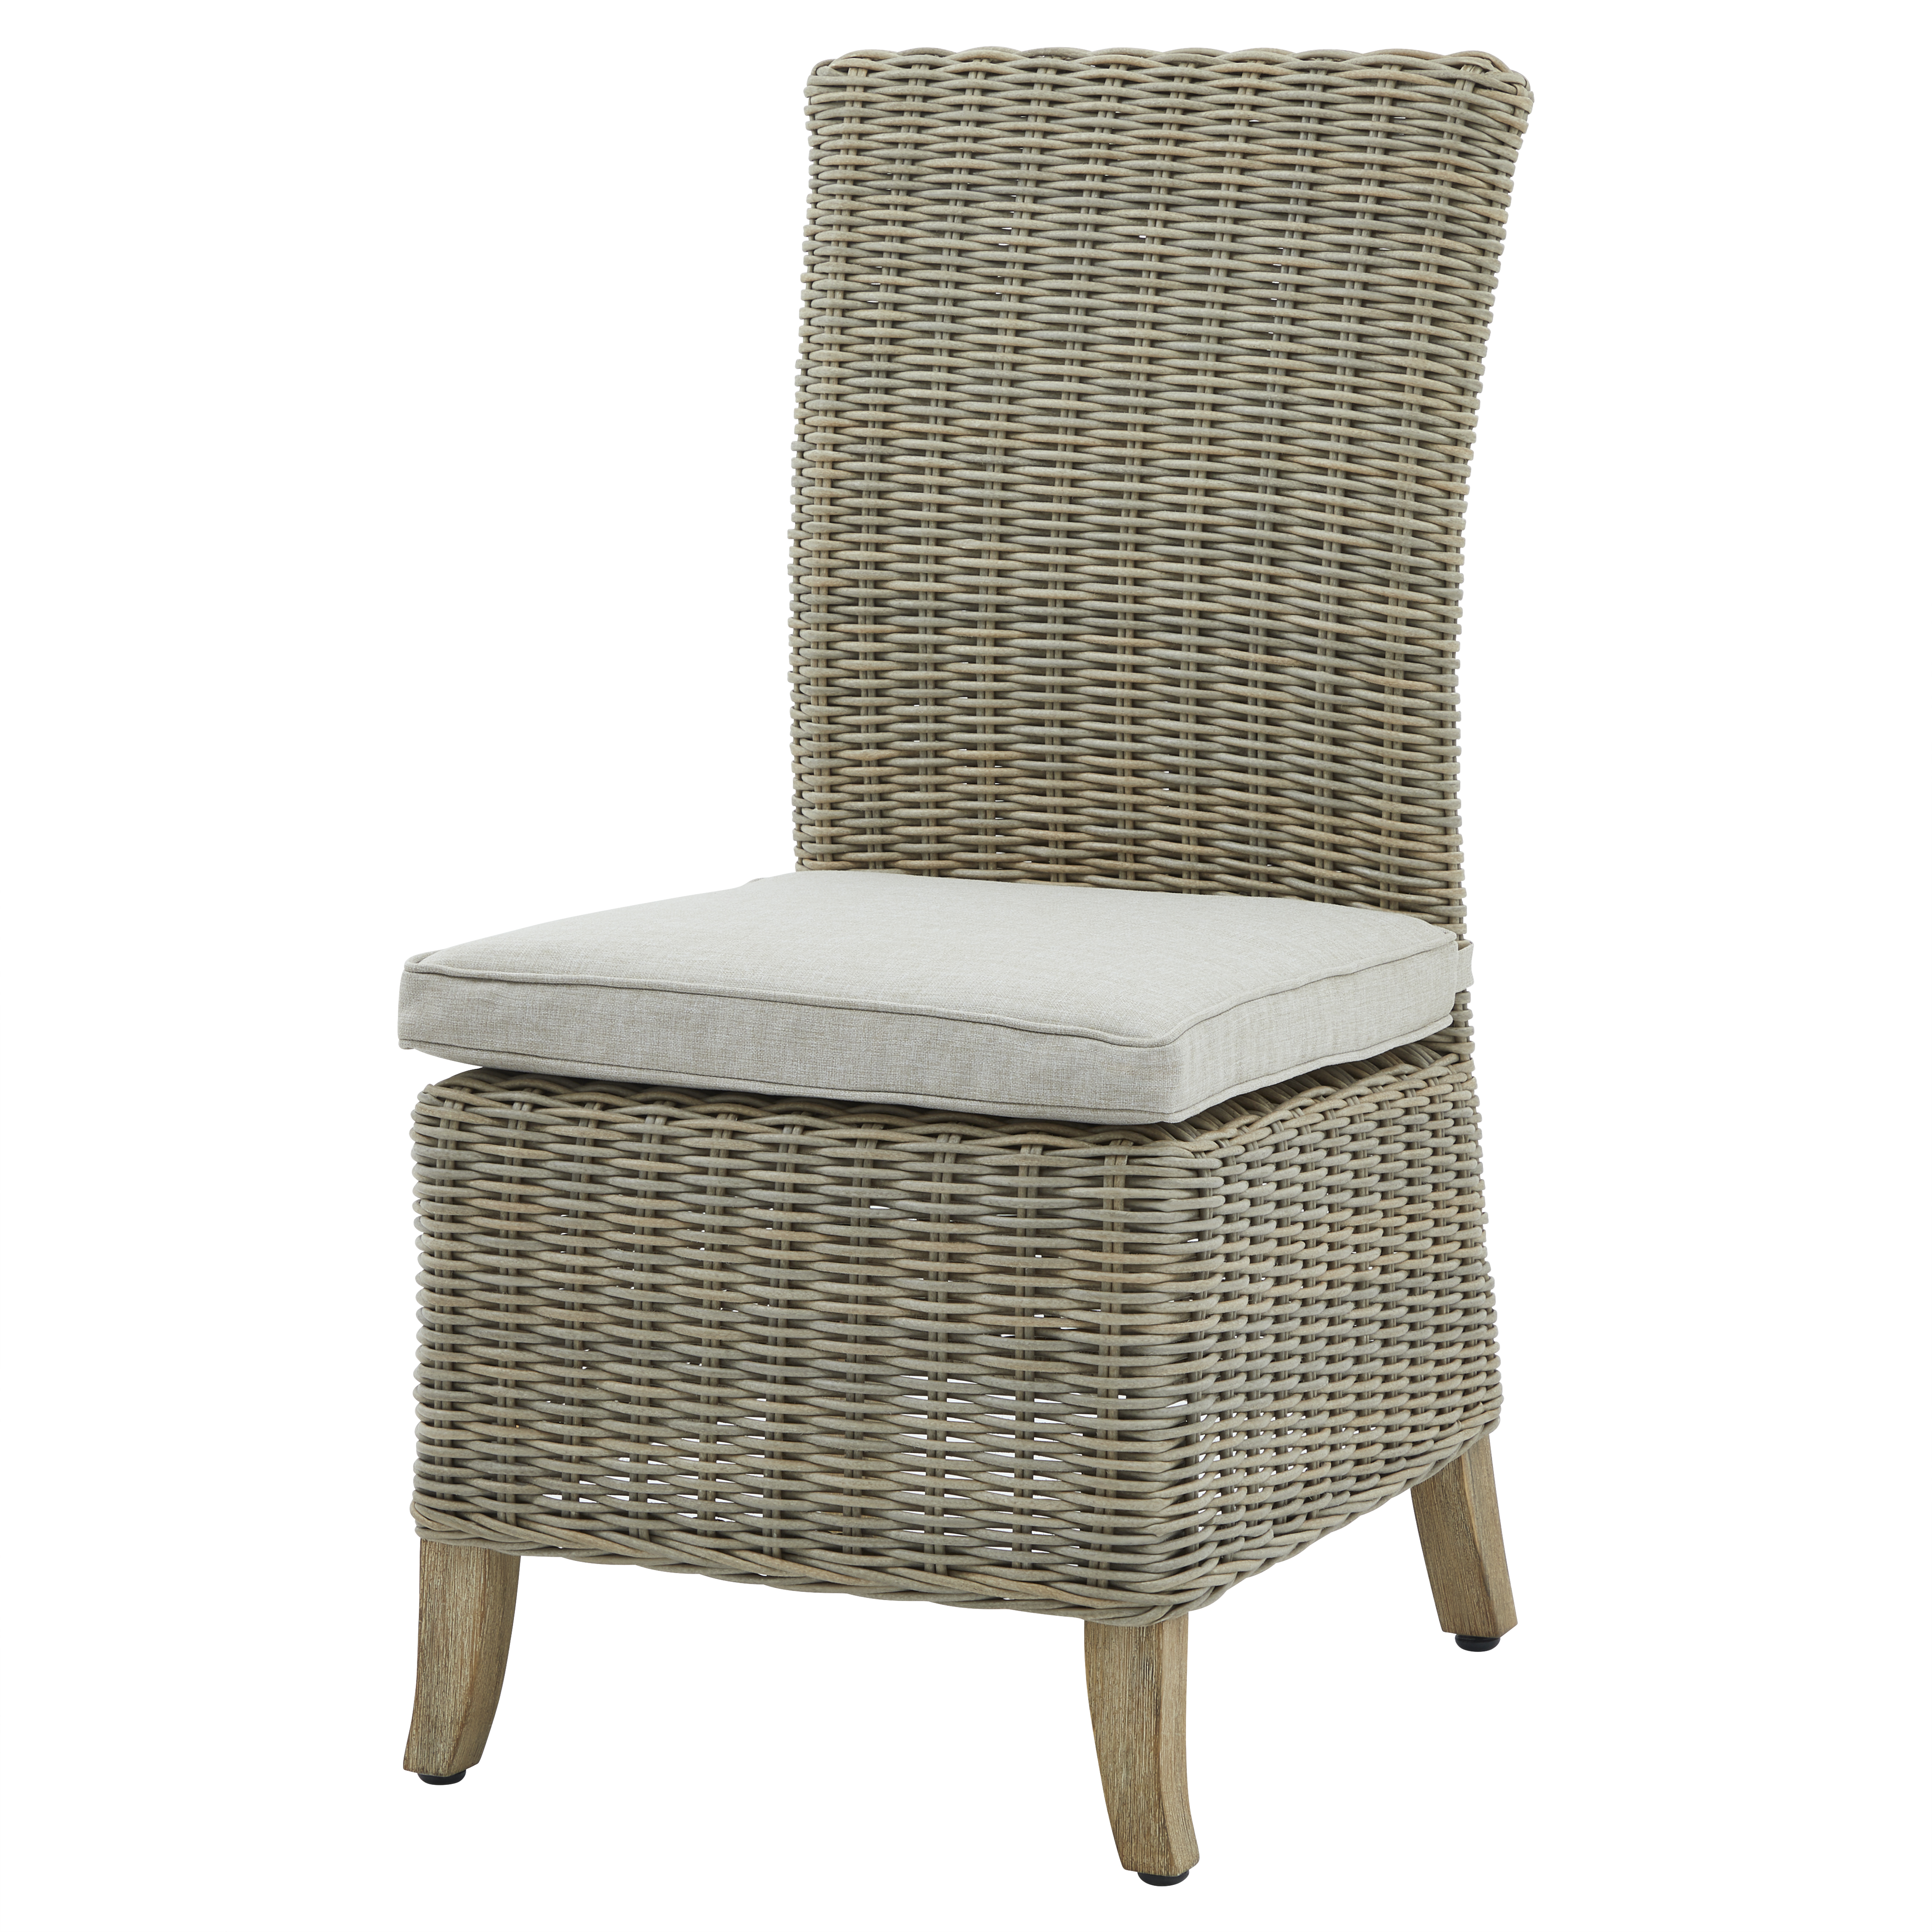 Capri Collection Outdoor Dining Chair - Image 1